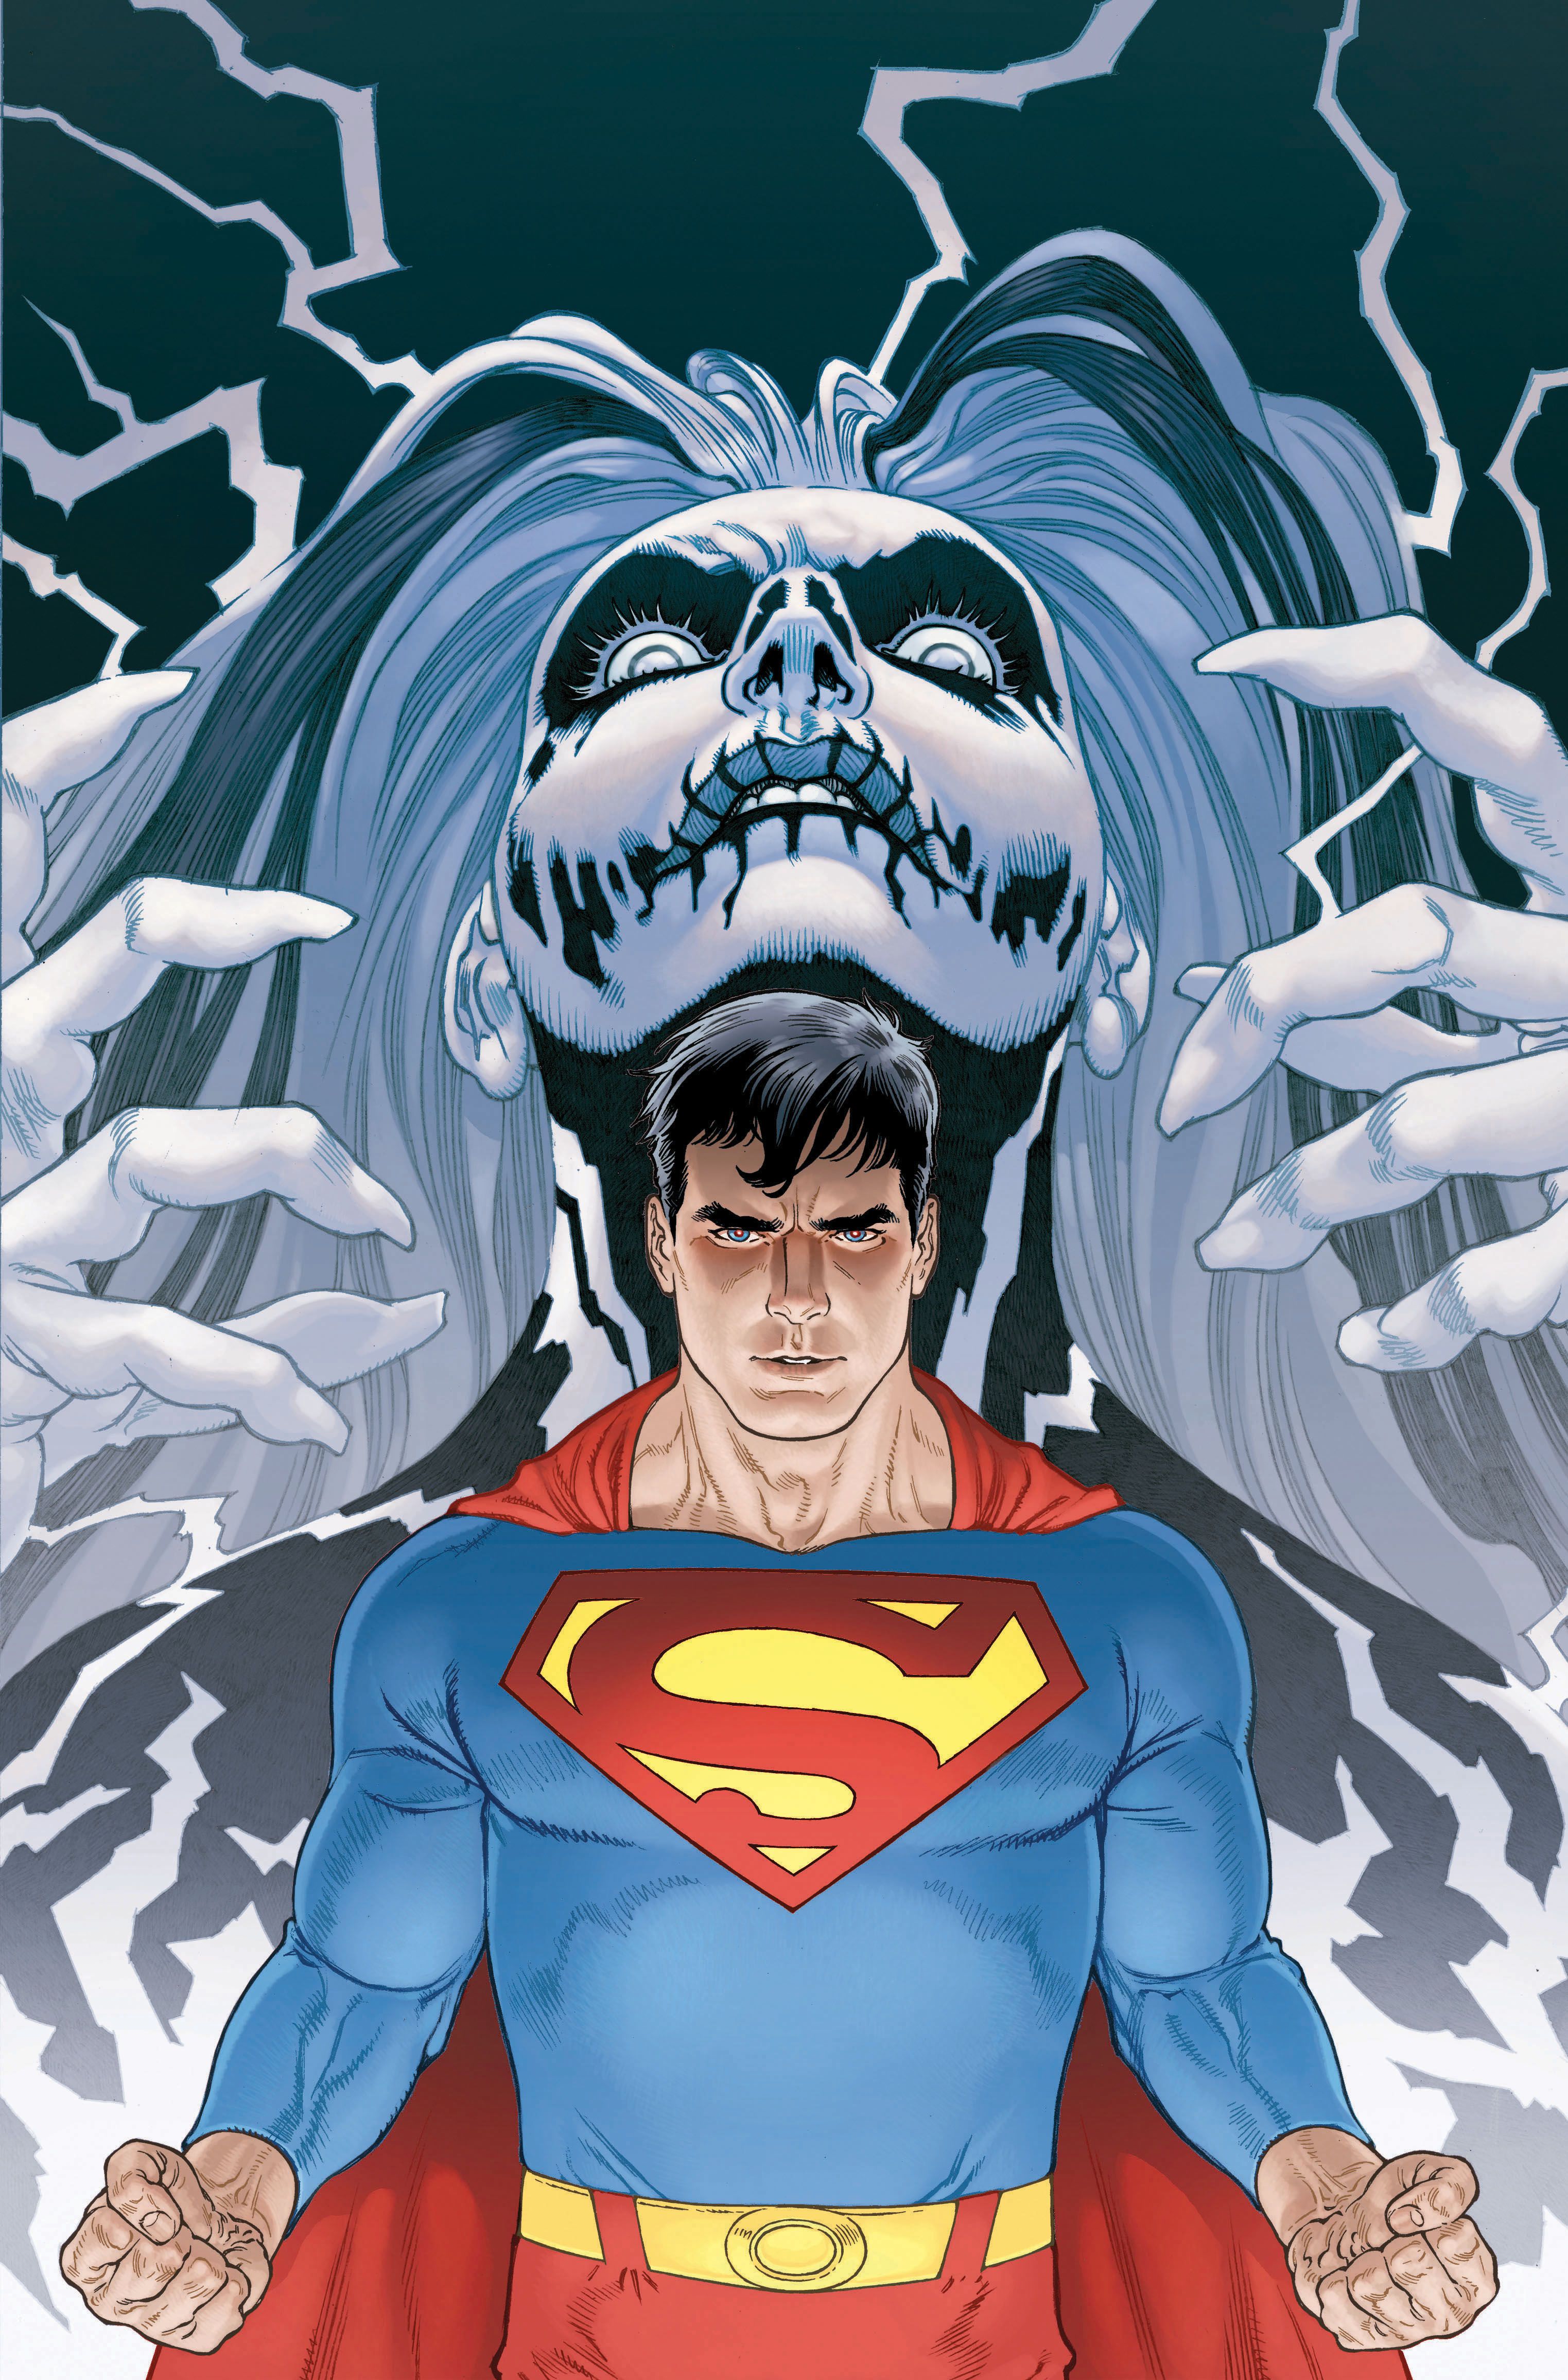 Superman 4 Open to Order Variant (Rodriguez)